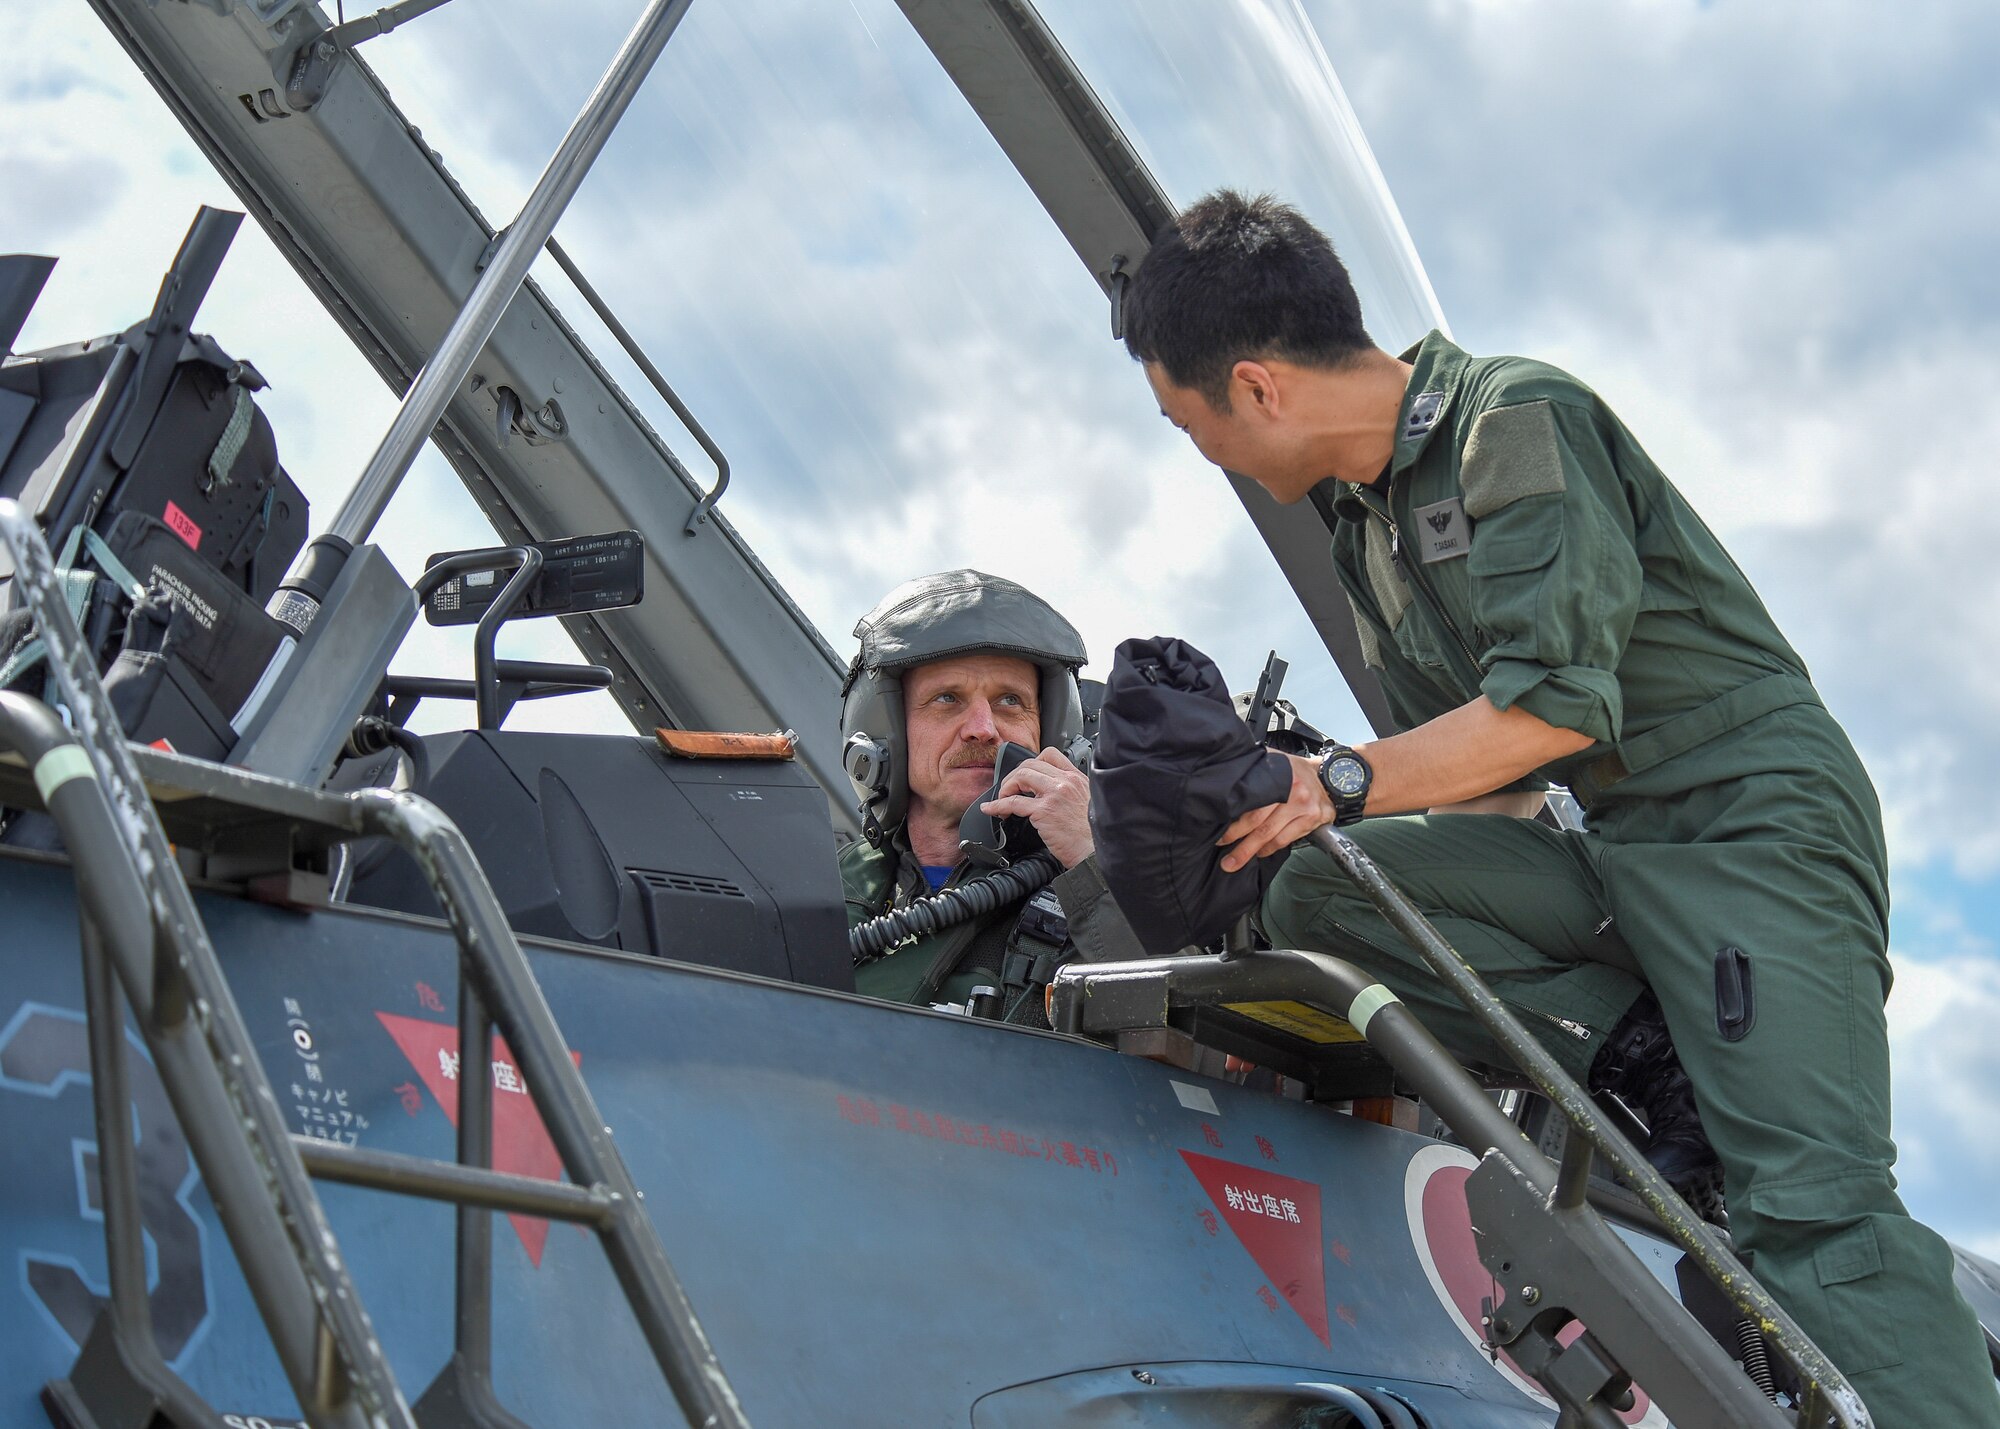 U.S. Air Force Col. R. Scott Jobe, the 35th Fighter Wing commander, speaks with Japan Air Self-Defense Force 1st Lt. Yoshinobu Sasaki, a 3rd Air Wing F-2 pilot, before a familiarization flight at Misawa Air Base, Japan, June 22, 2018. The flight gave Jobe, an F-16 Fighting Falcon pilot, the opportunity to experience the Mitsubishi  F-2 mission set. (U.S. Air Force photo by Airman 1st Class Collette Brooks)